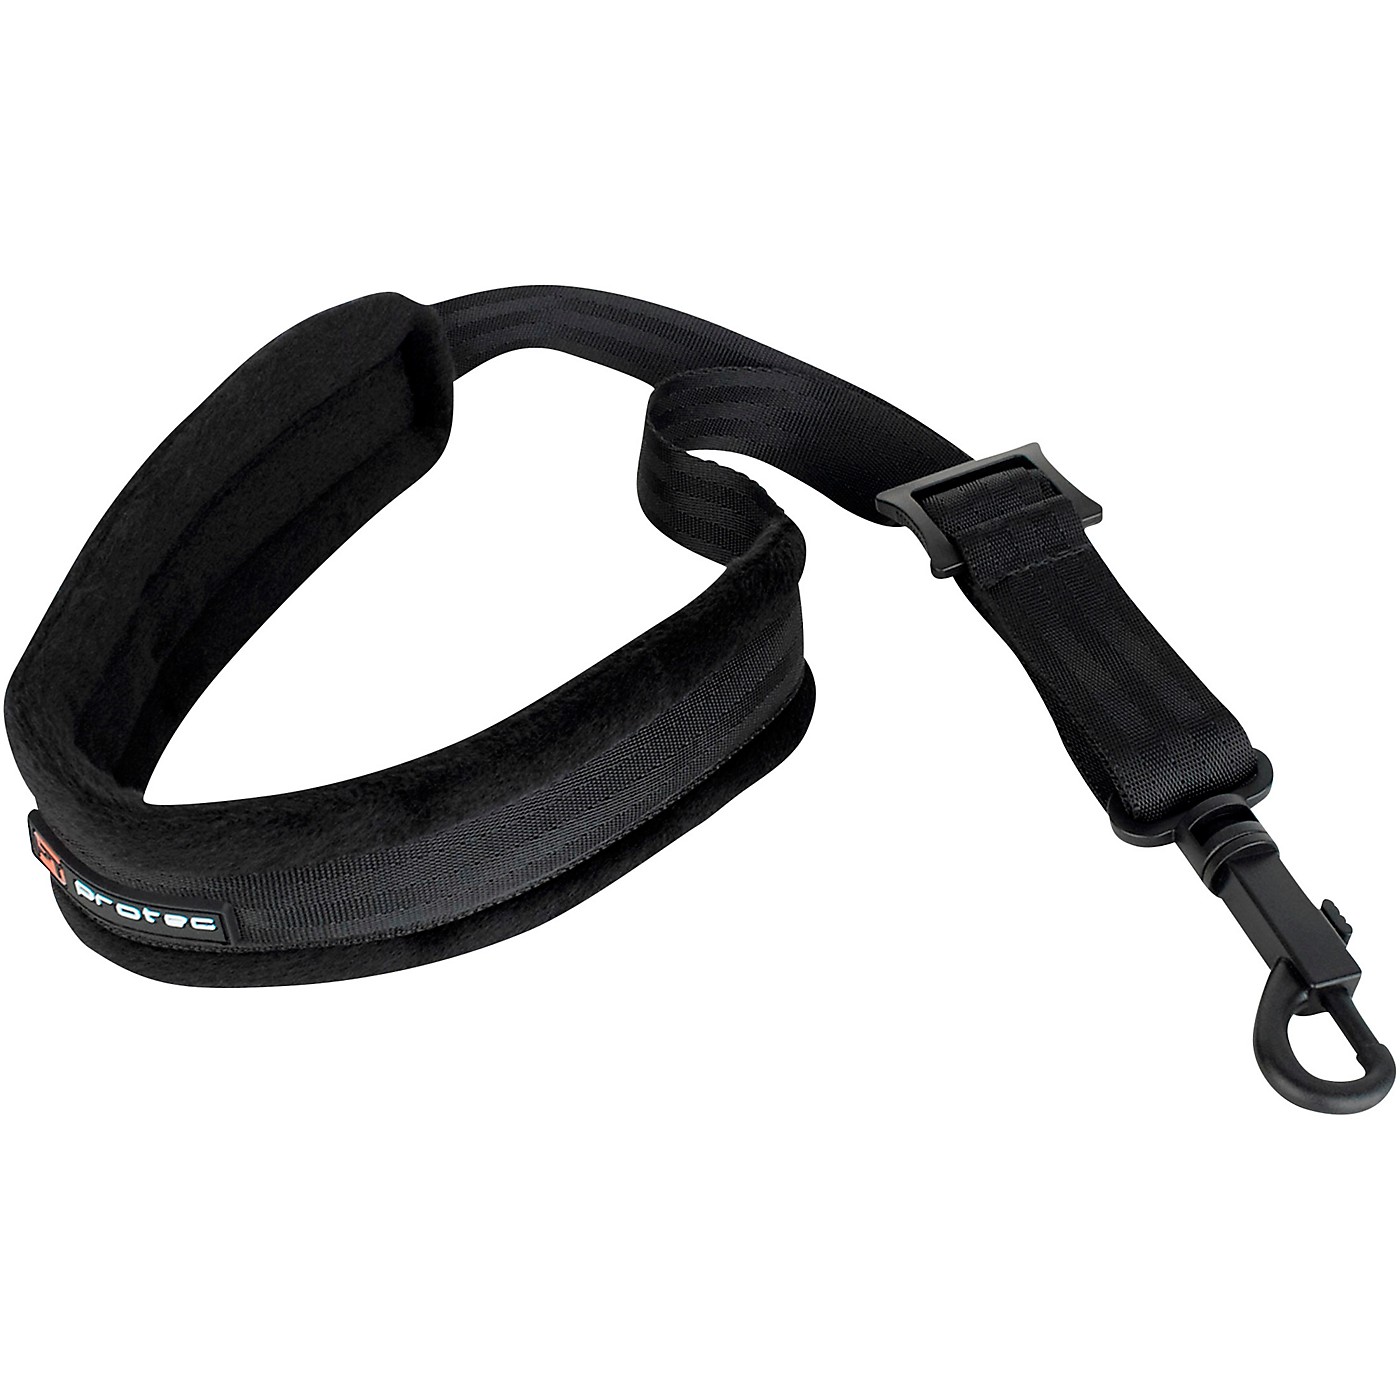 Protec Saxophone Neck Strap with Velour Neck Pad and Plastic Swivel Snap, 22-In. Length thumbnail